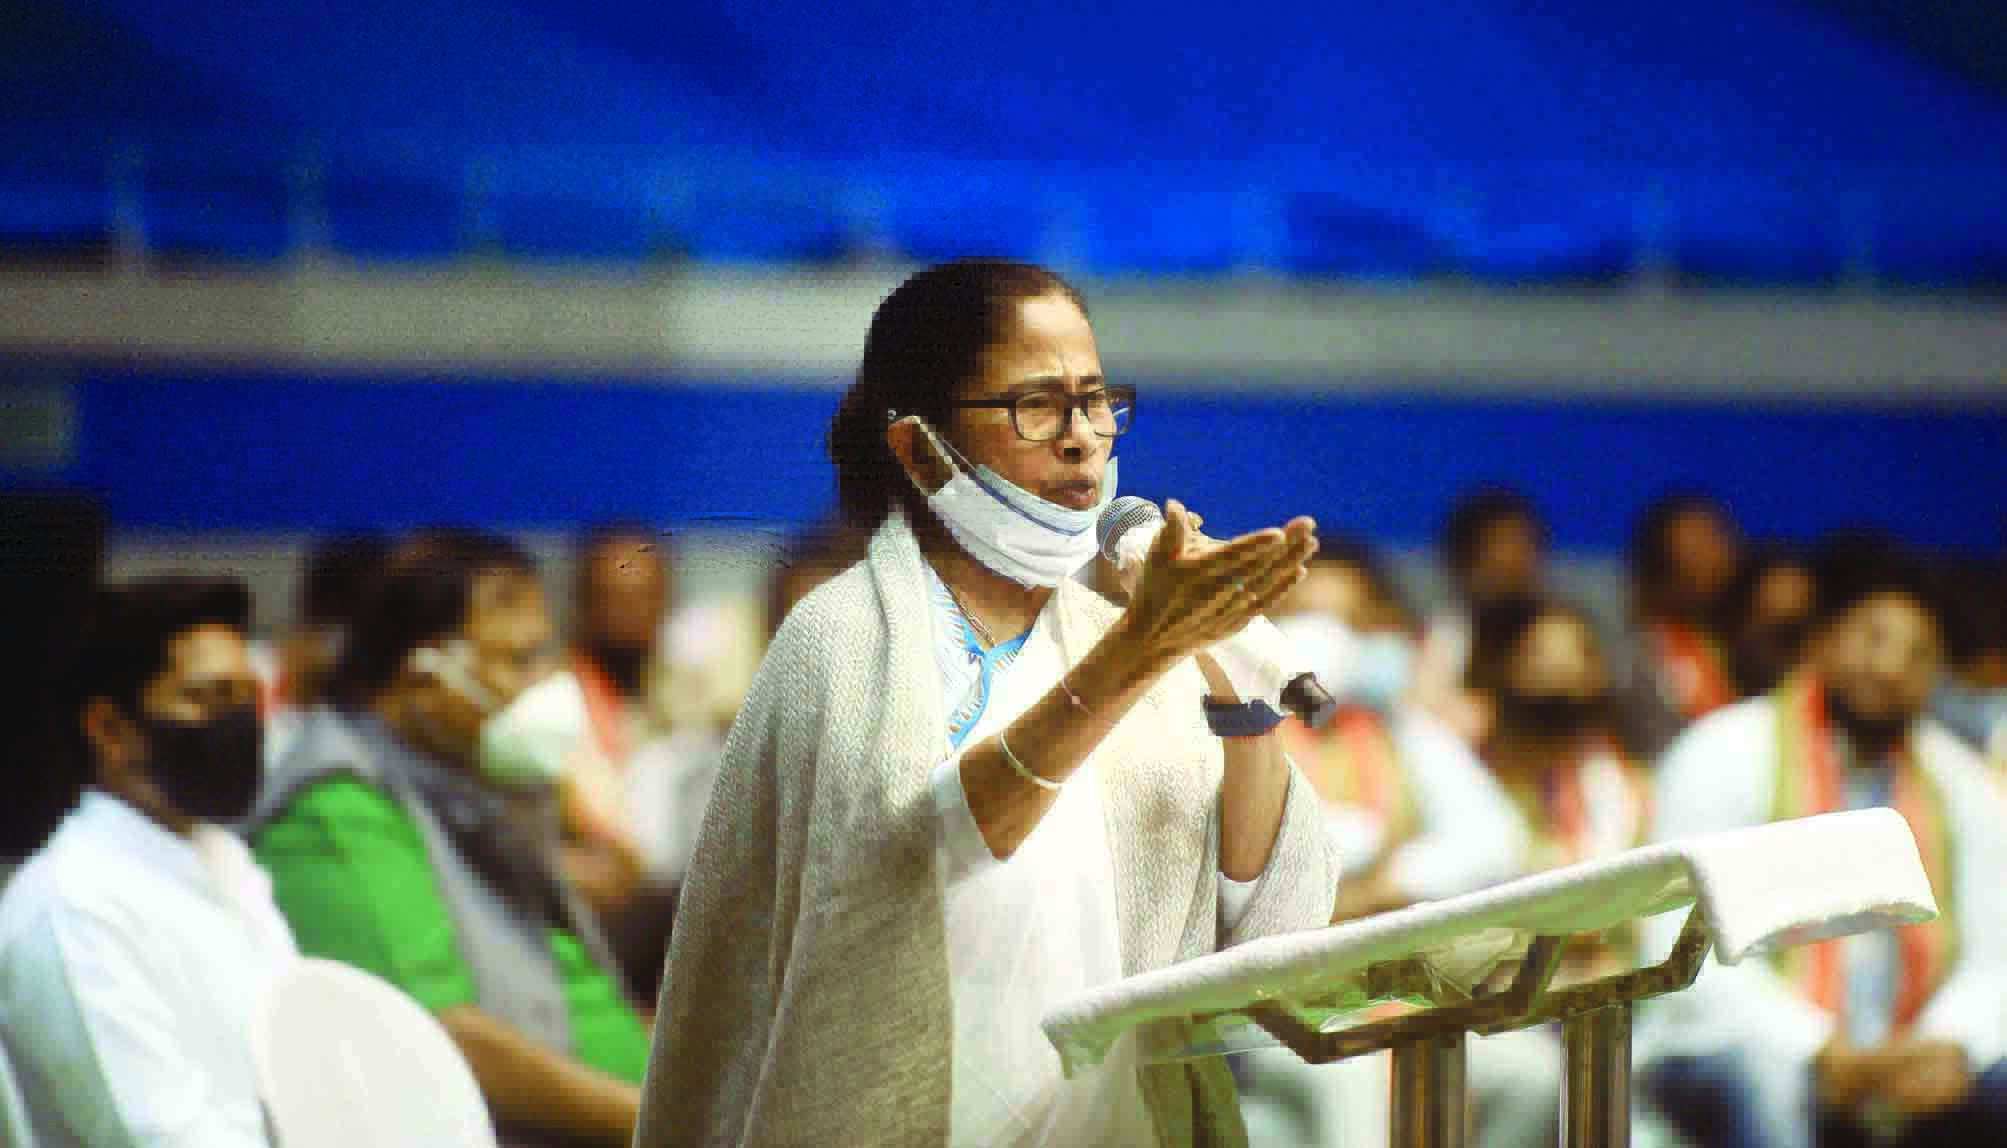 No groups or sub-groups exist in TMC, fight unitedly against BJP, says Mamata